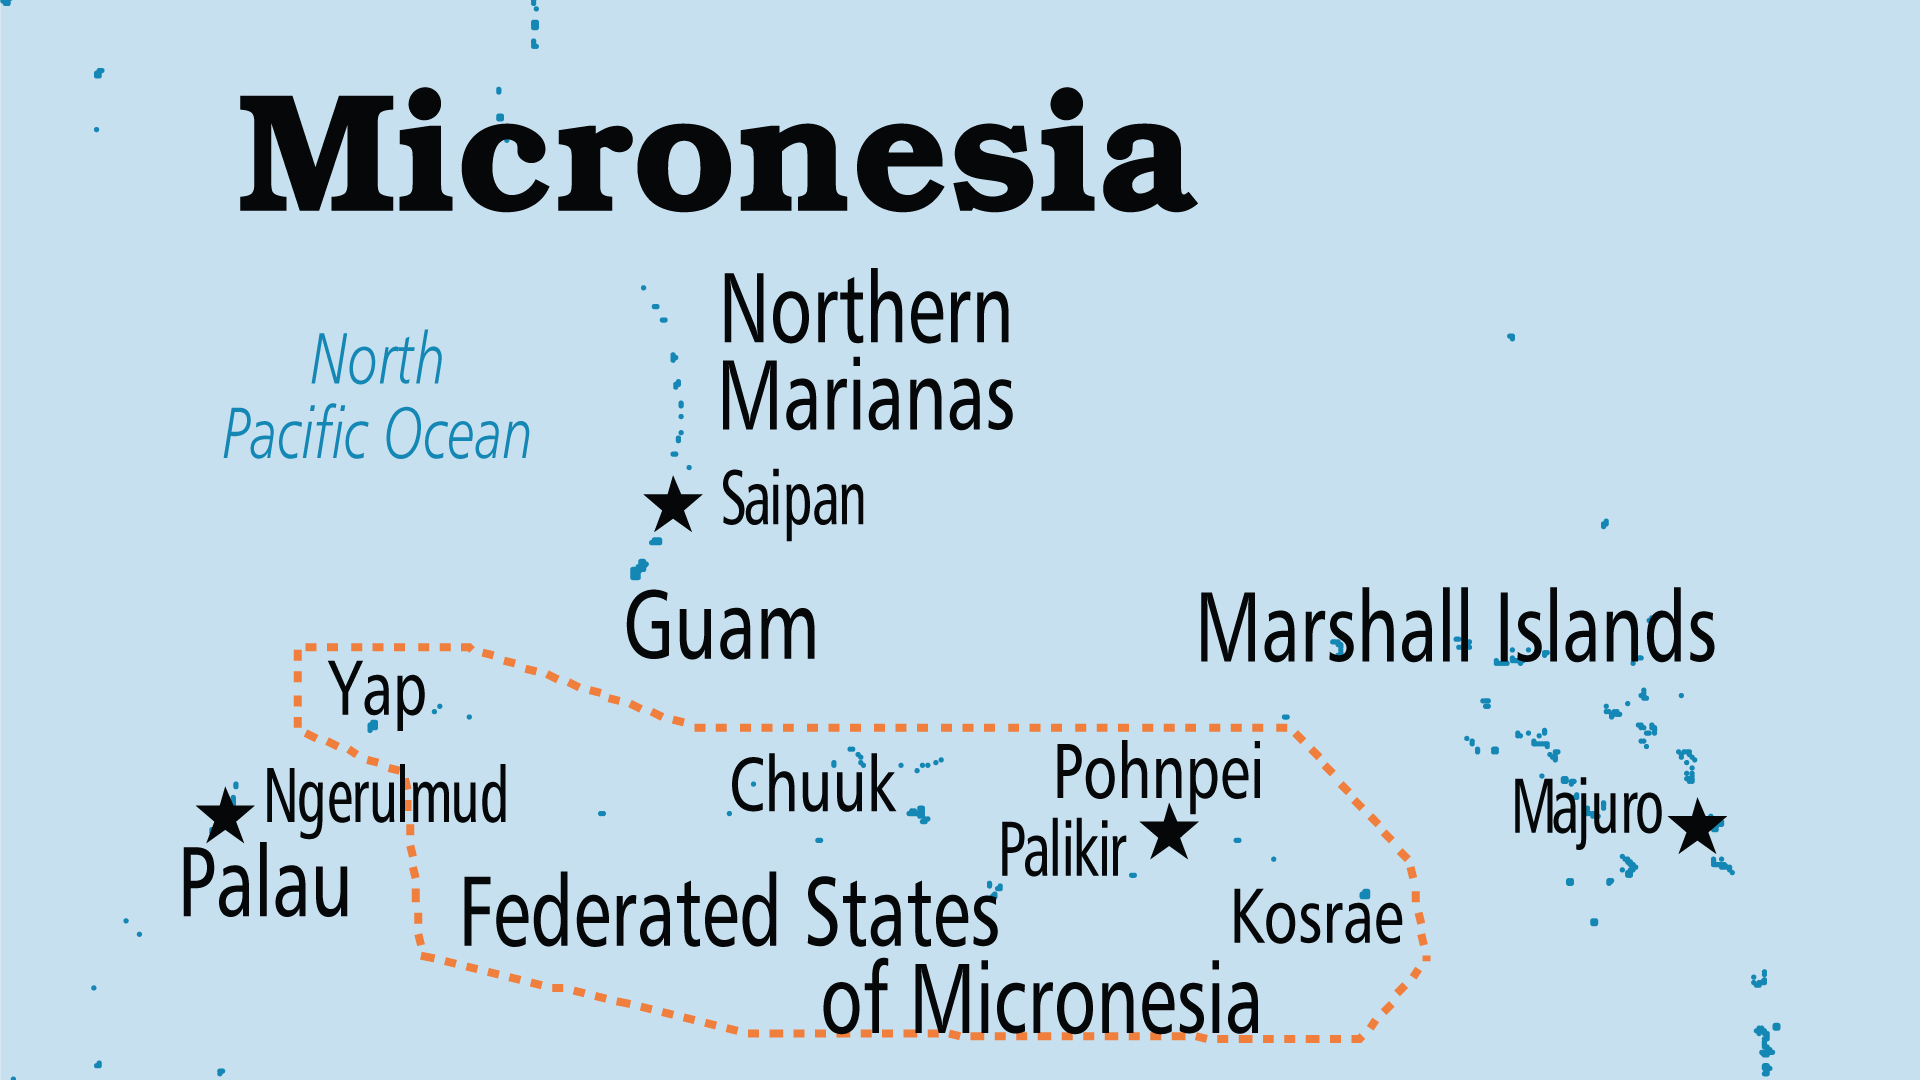 Micronesia, Federated States of (Operation World)